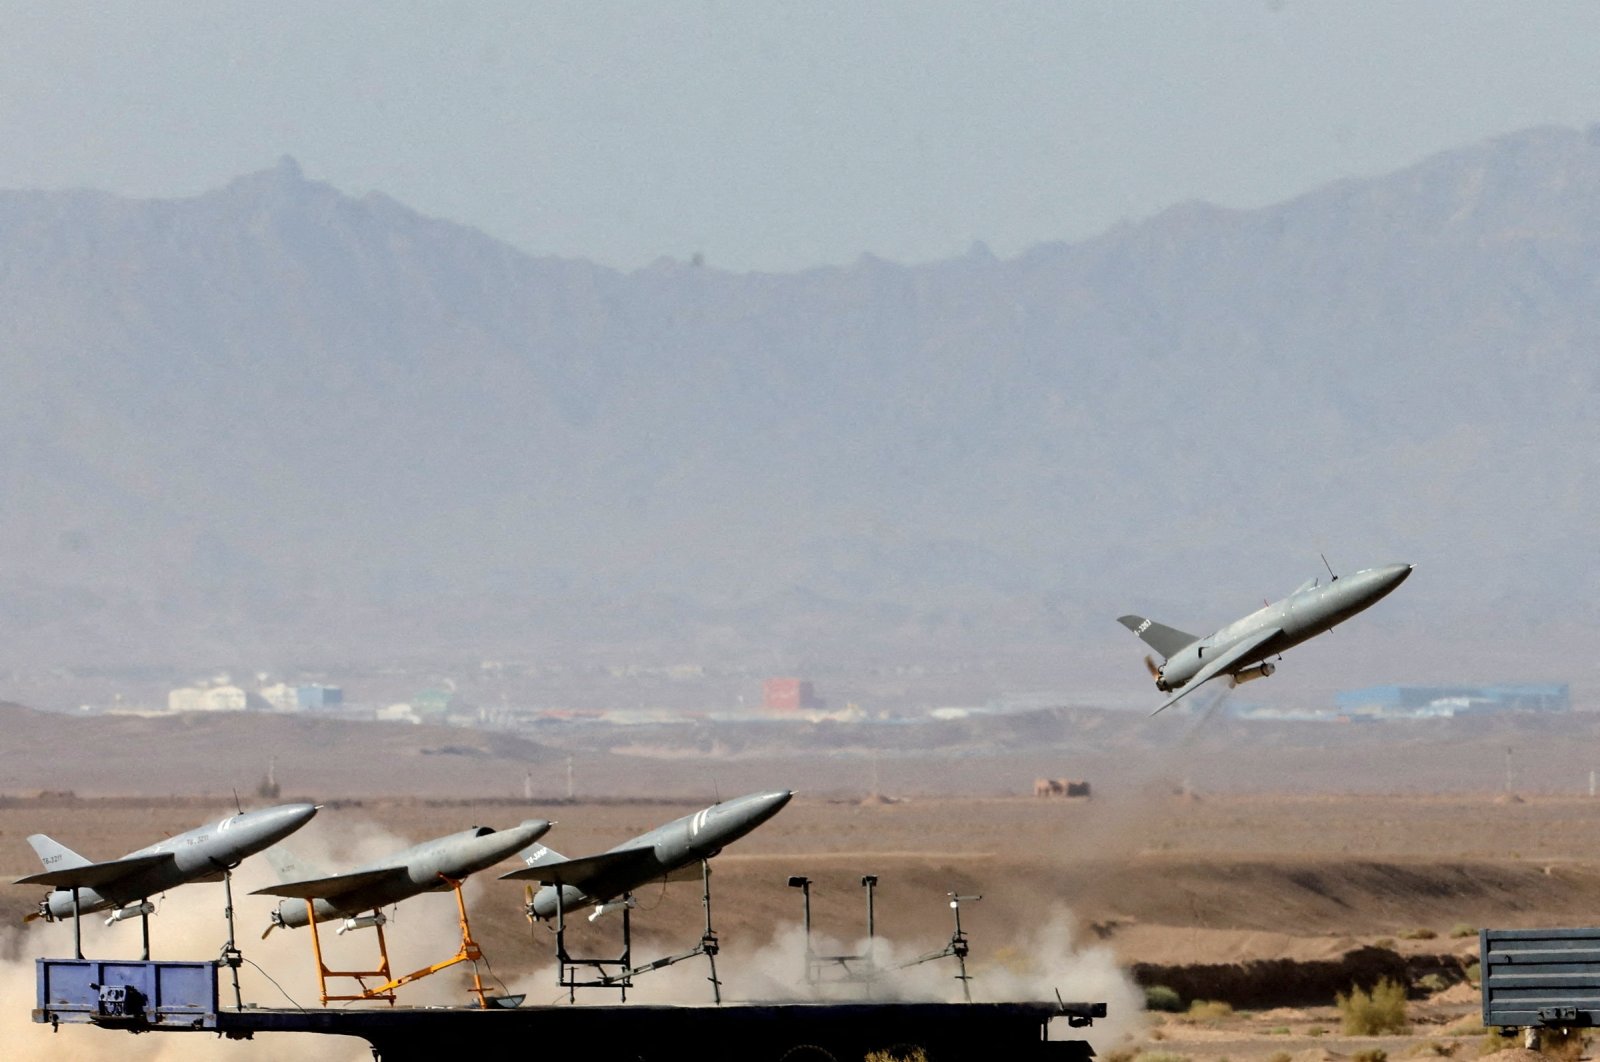 A drone is launched during a military exercise in an undisclosed location in Iran, in this handout image obtained via the Iranian military, Aug. 25, 2022. (Reuters Photo)